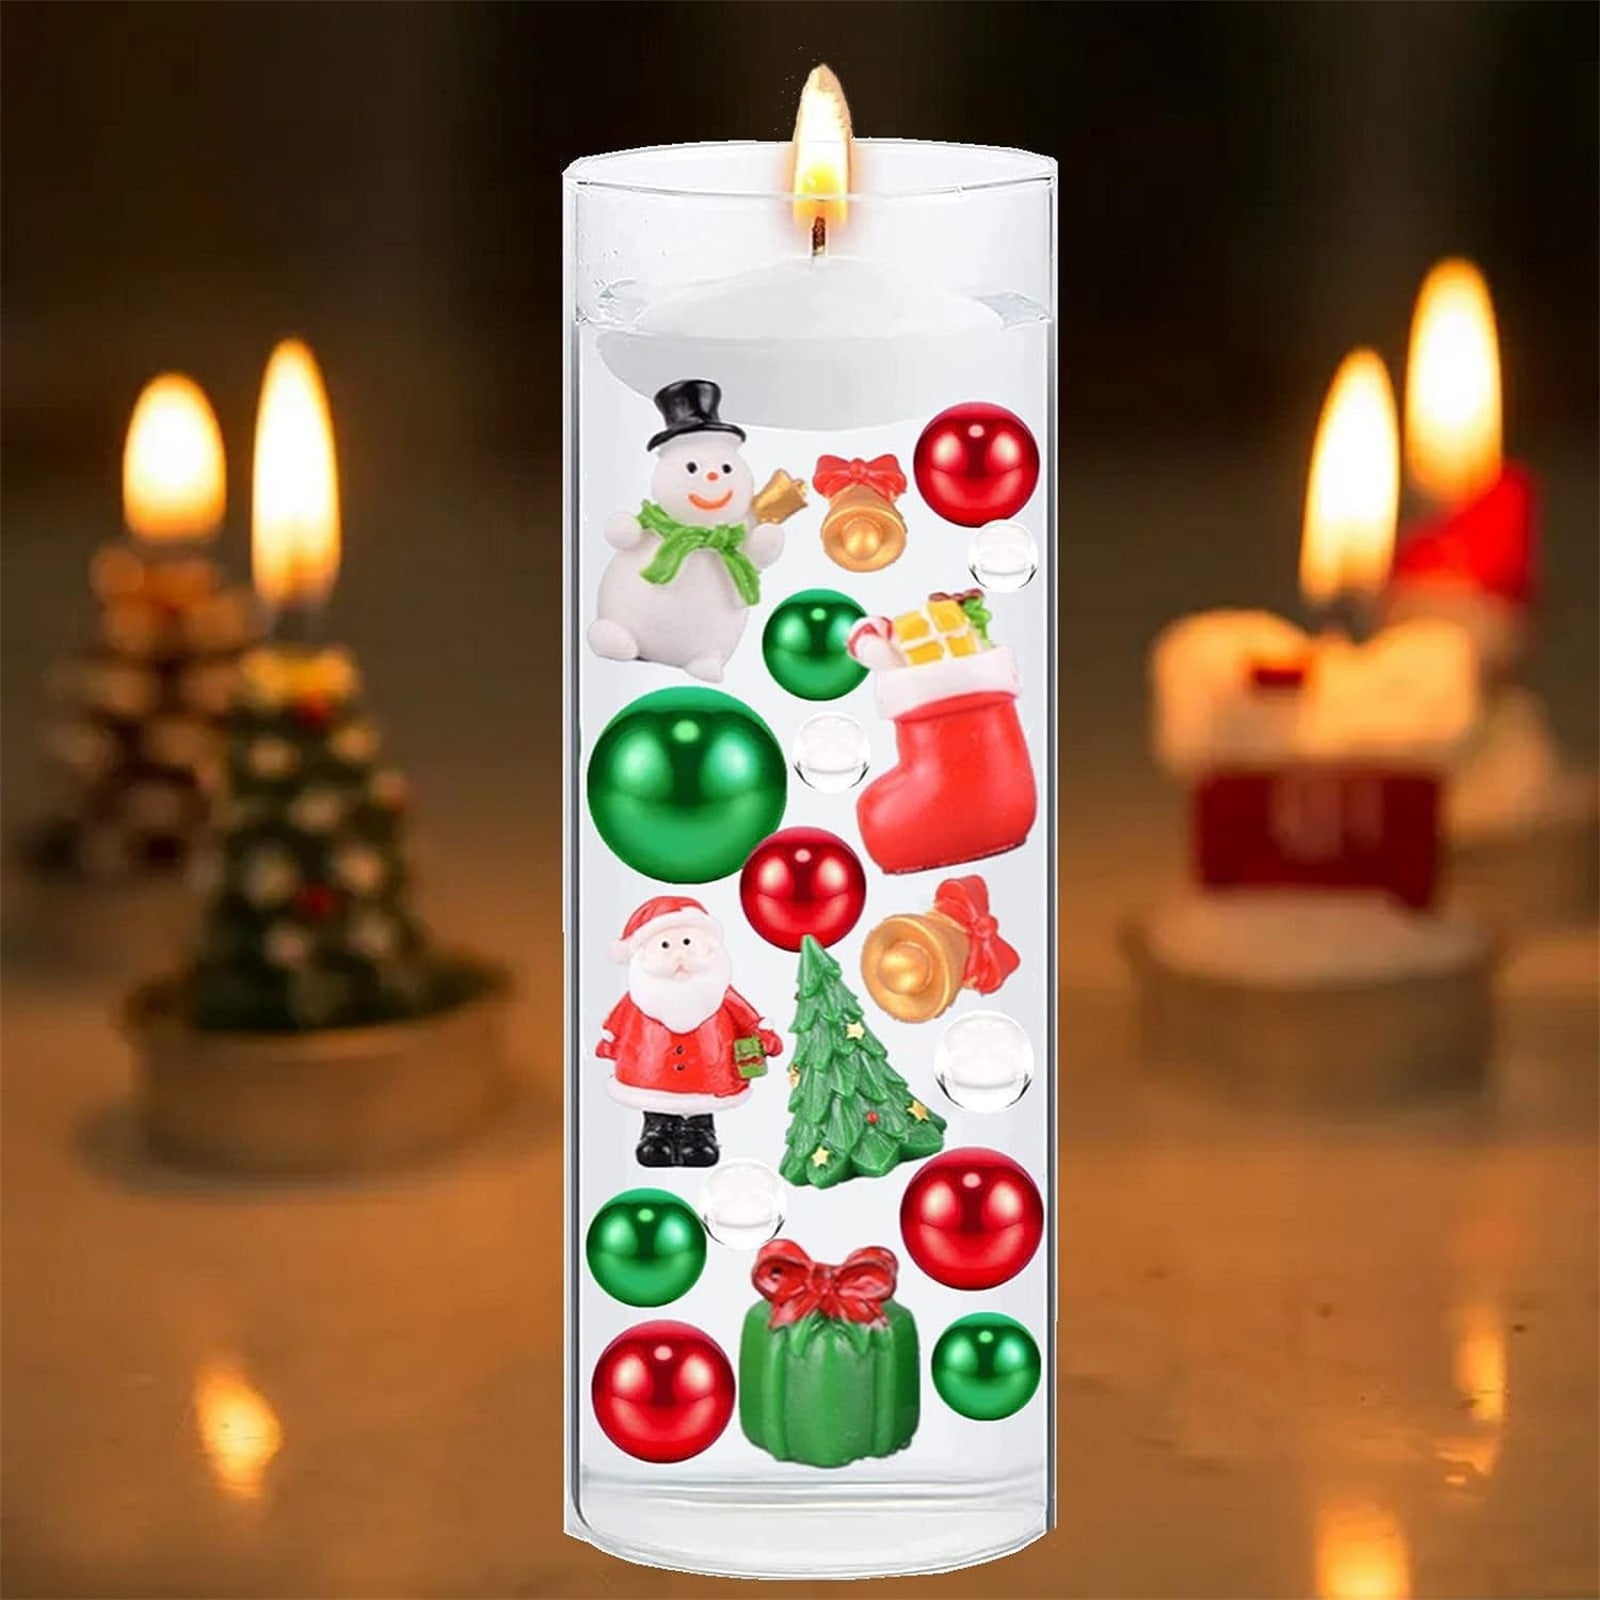 Lingouzi Christmas Vase Filler Beads Floating Pearls Water Gel Beads For  Vase Filler Table Centerpiecesadd a strong Christmas theme atmosphere